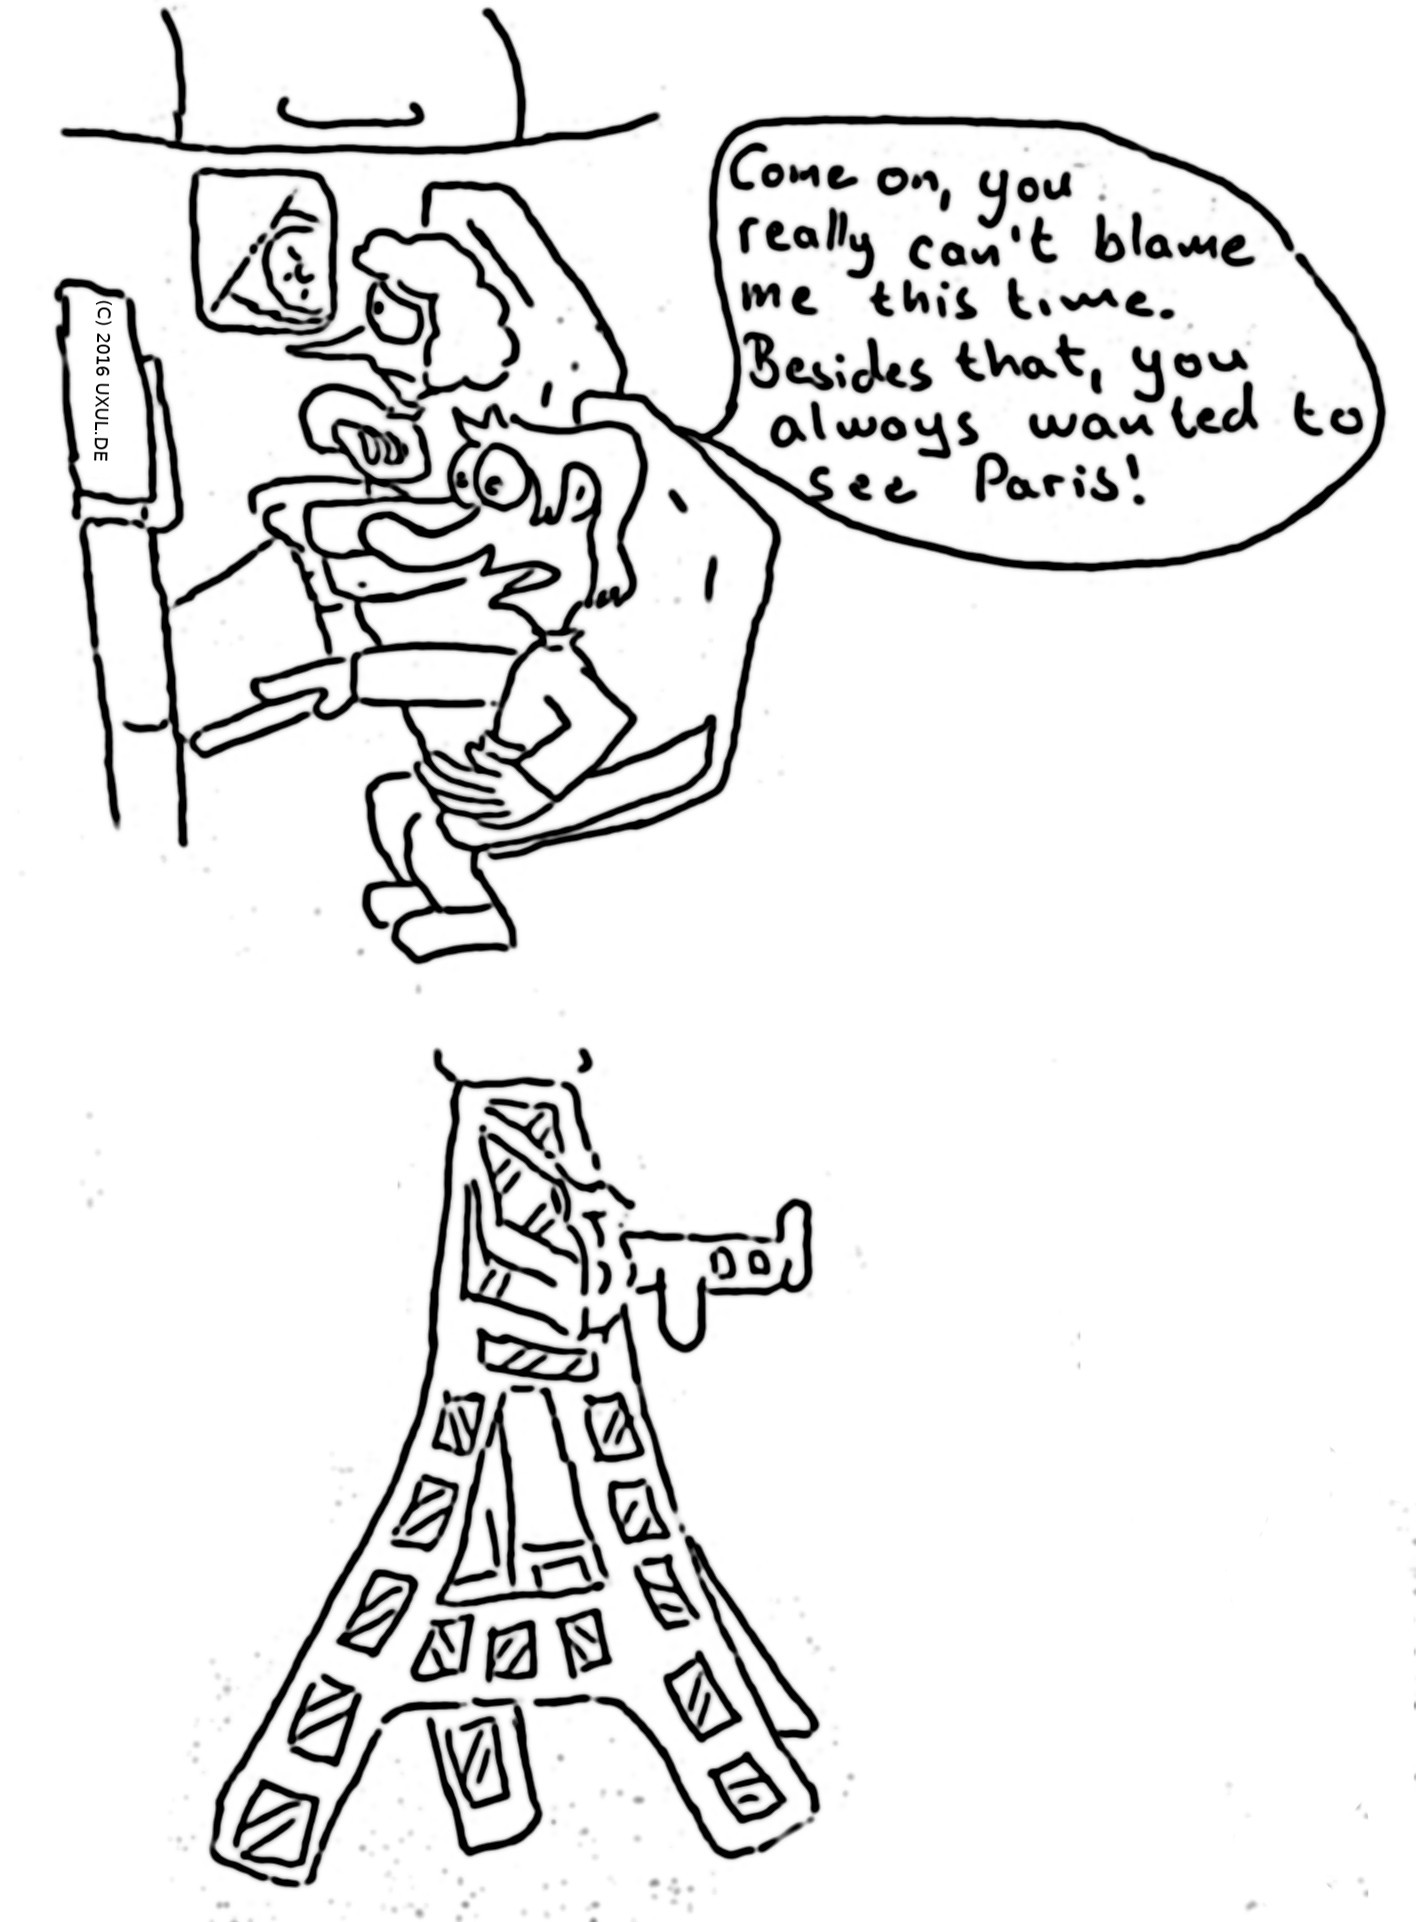 Panel 1: Two persons sitting in a plane. The person on the right side crosses arms and looks out of the window sadly. The person on the right side plays with the table of the front-seat and says: "Come on, you really can't blame me this time. Besides that, you always wanted to see Paris!" -- Panel 2: The plane crashes into the Eiffel Tower.